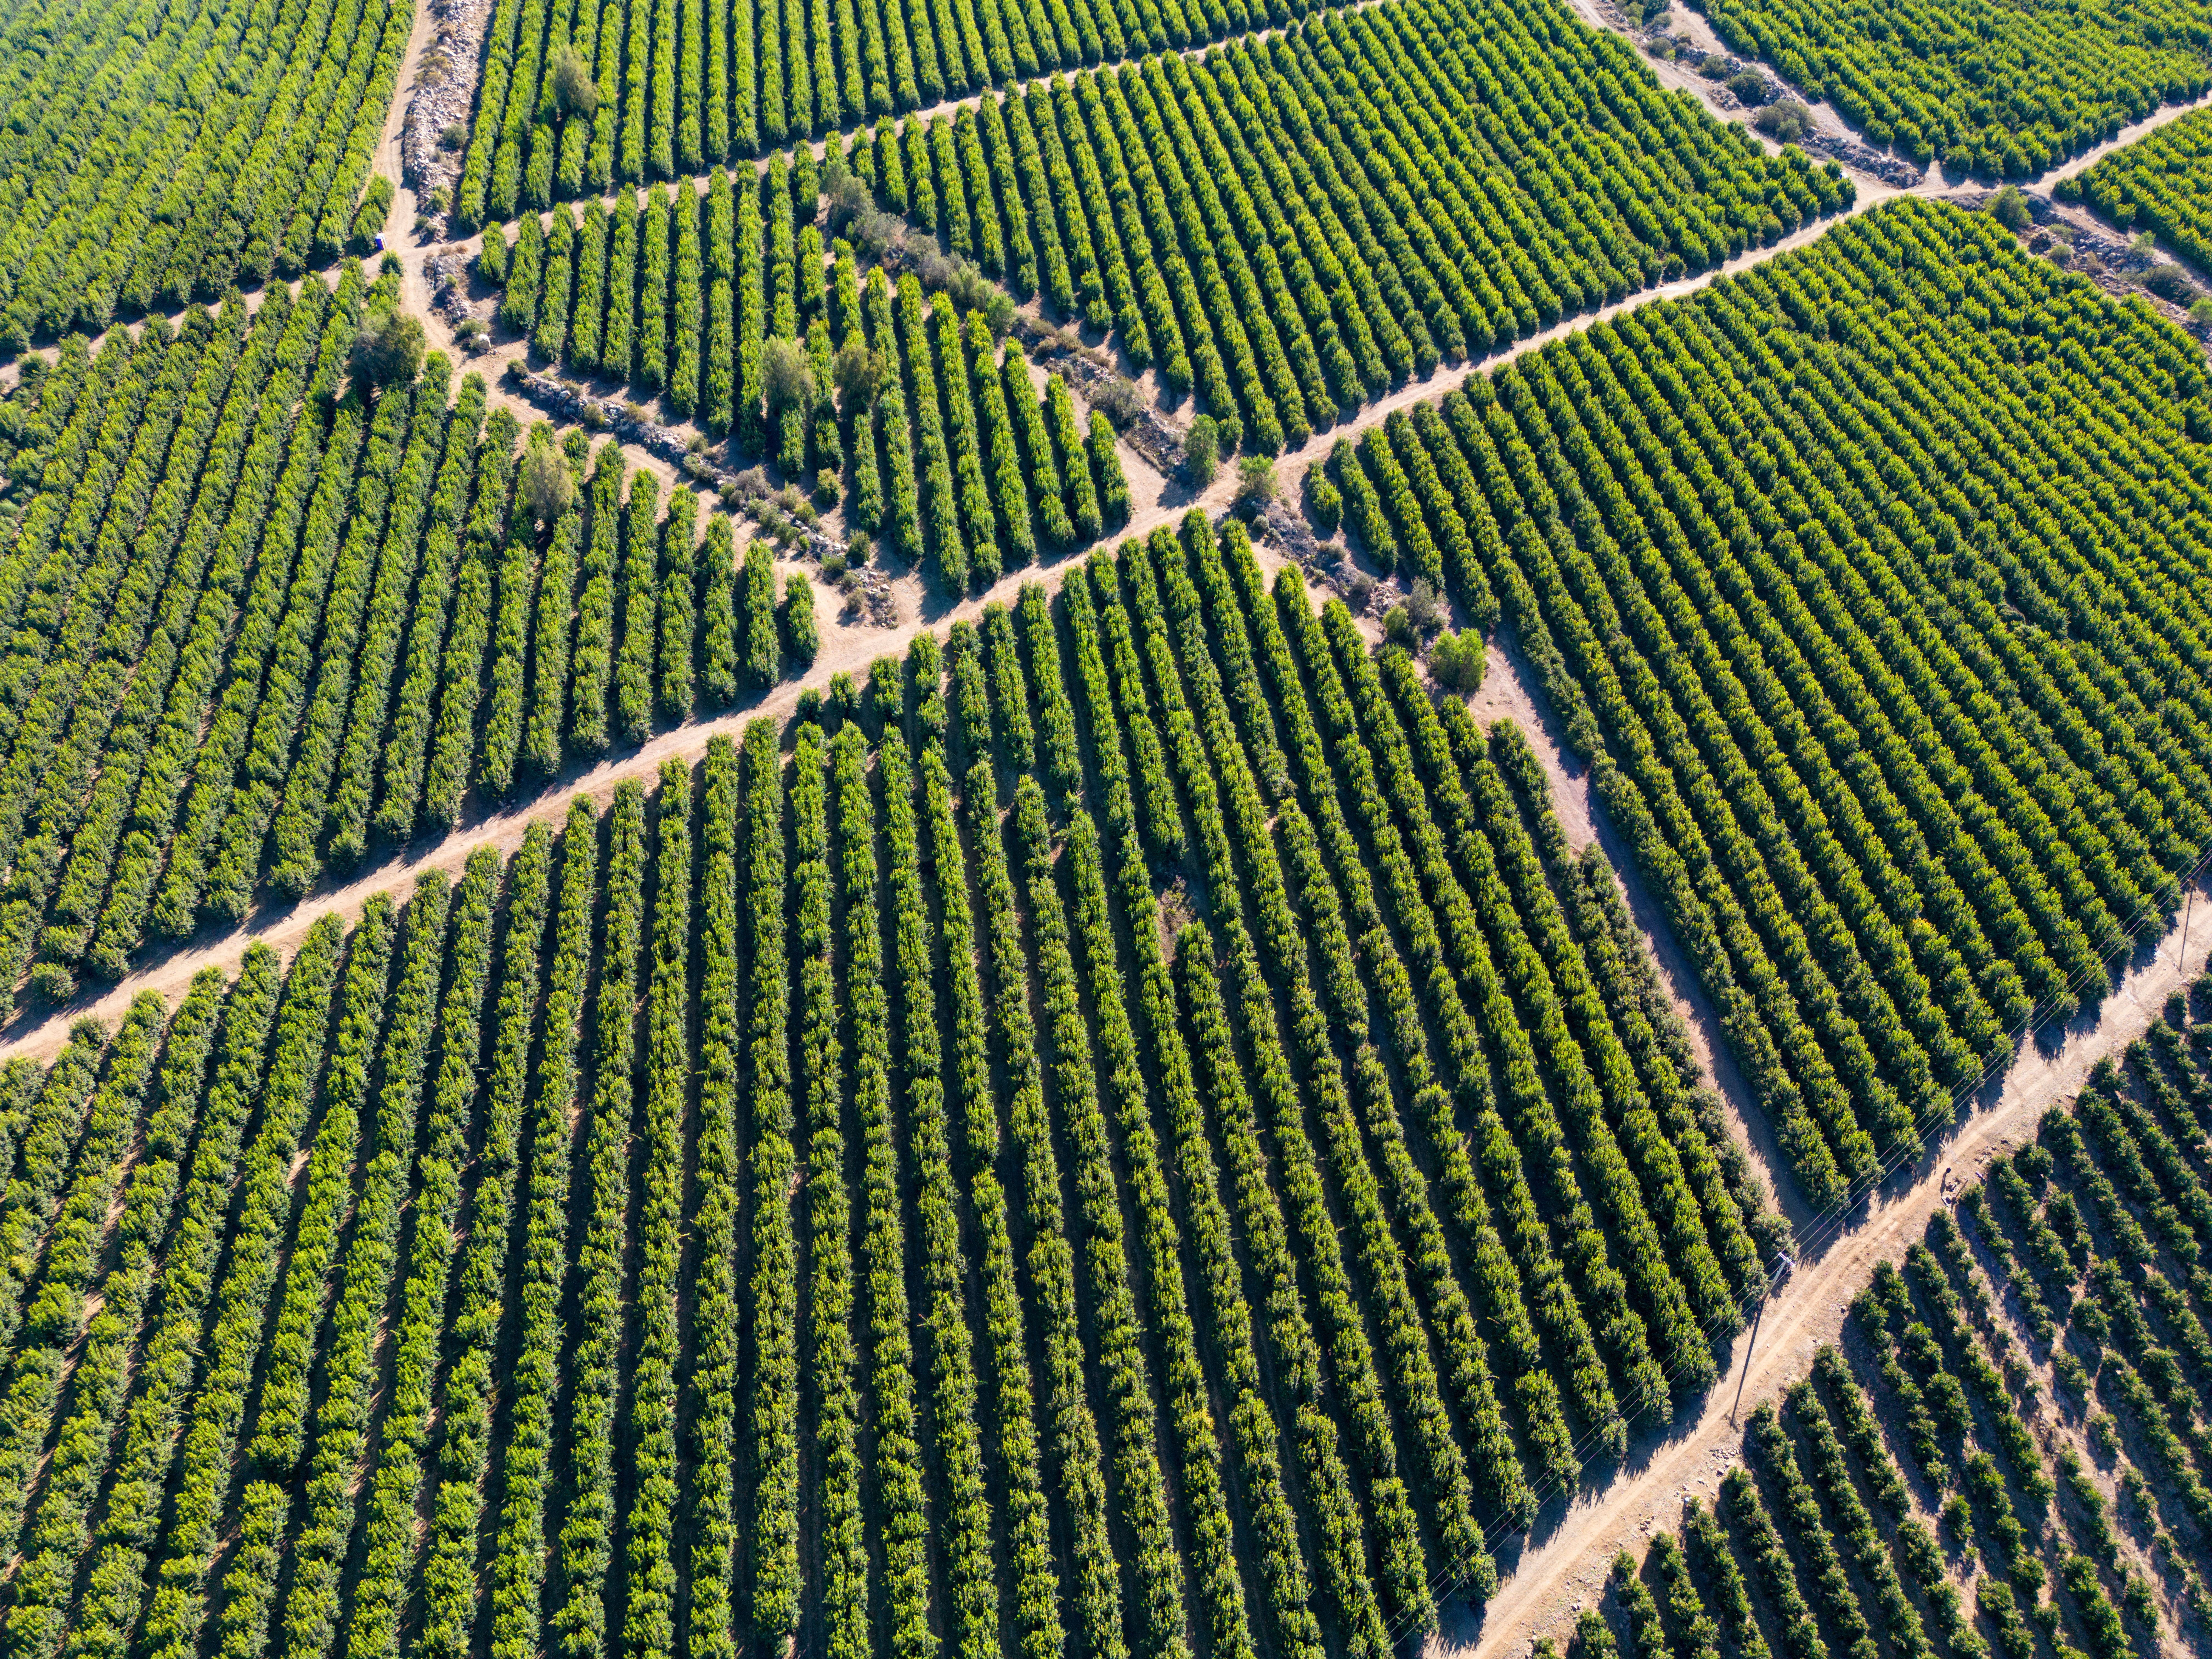 An aerial view of a citrus field with rows of trees in Chile.